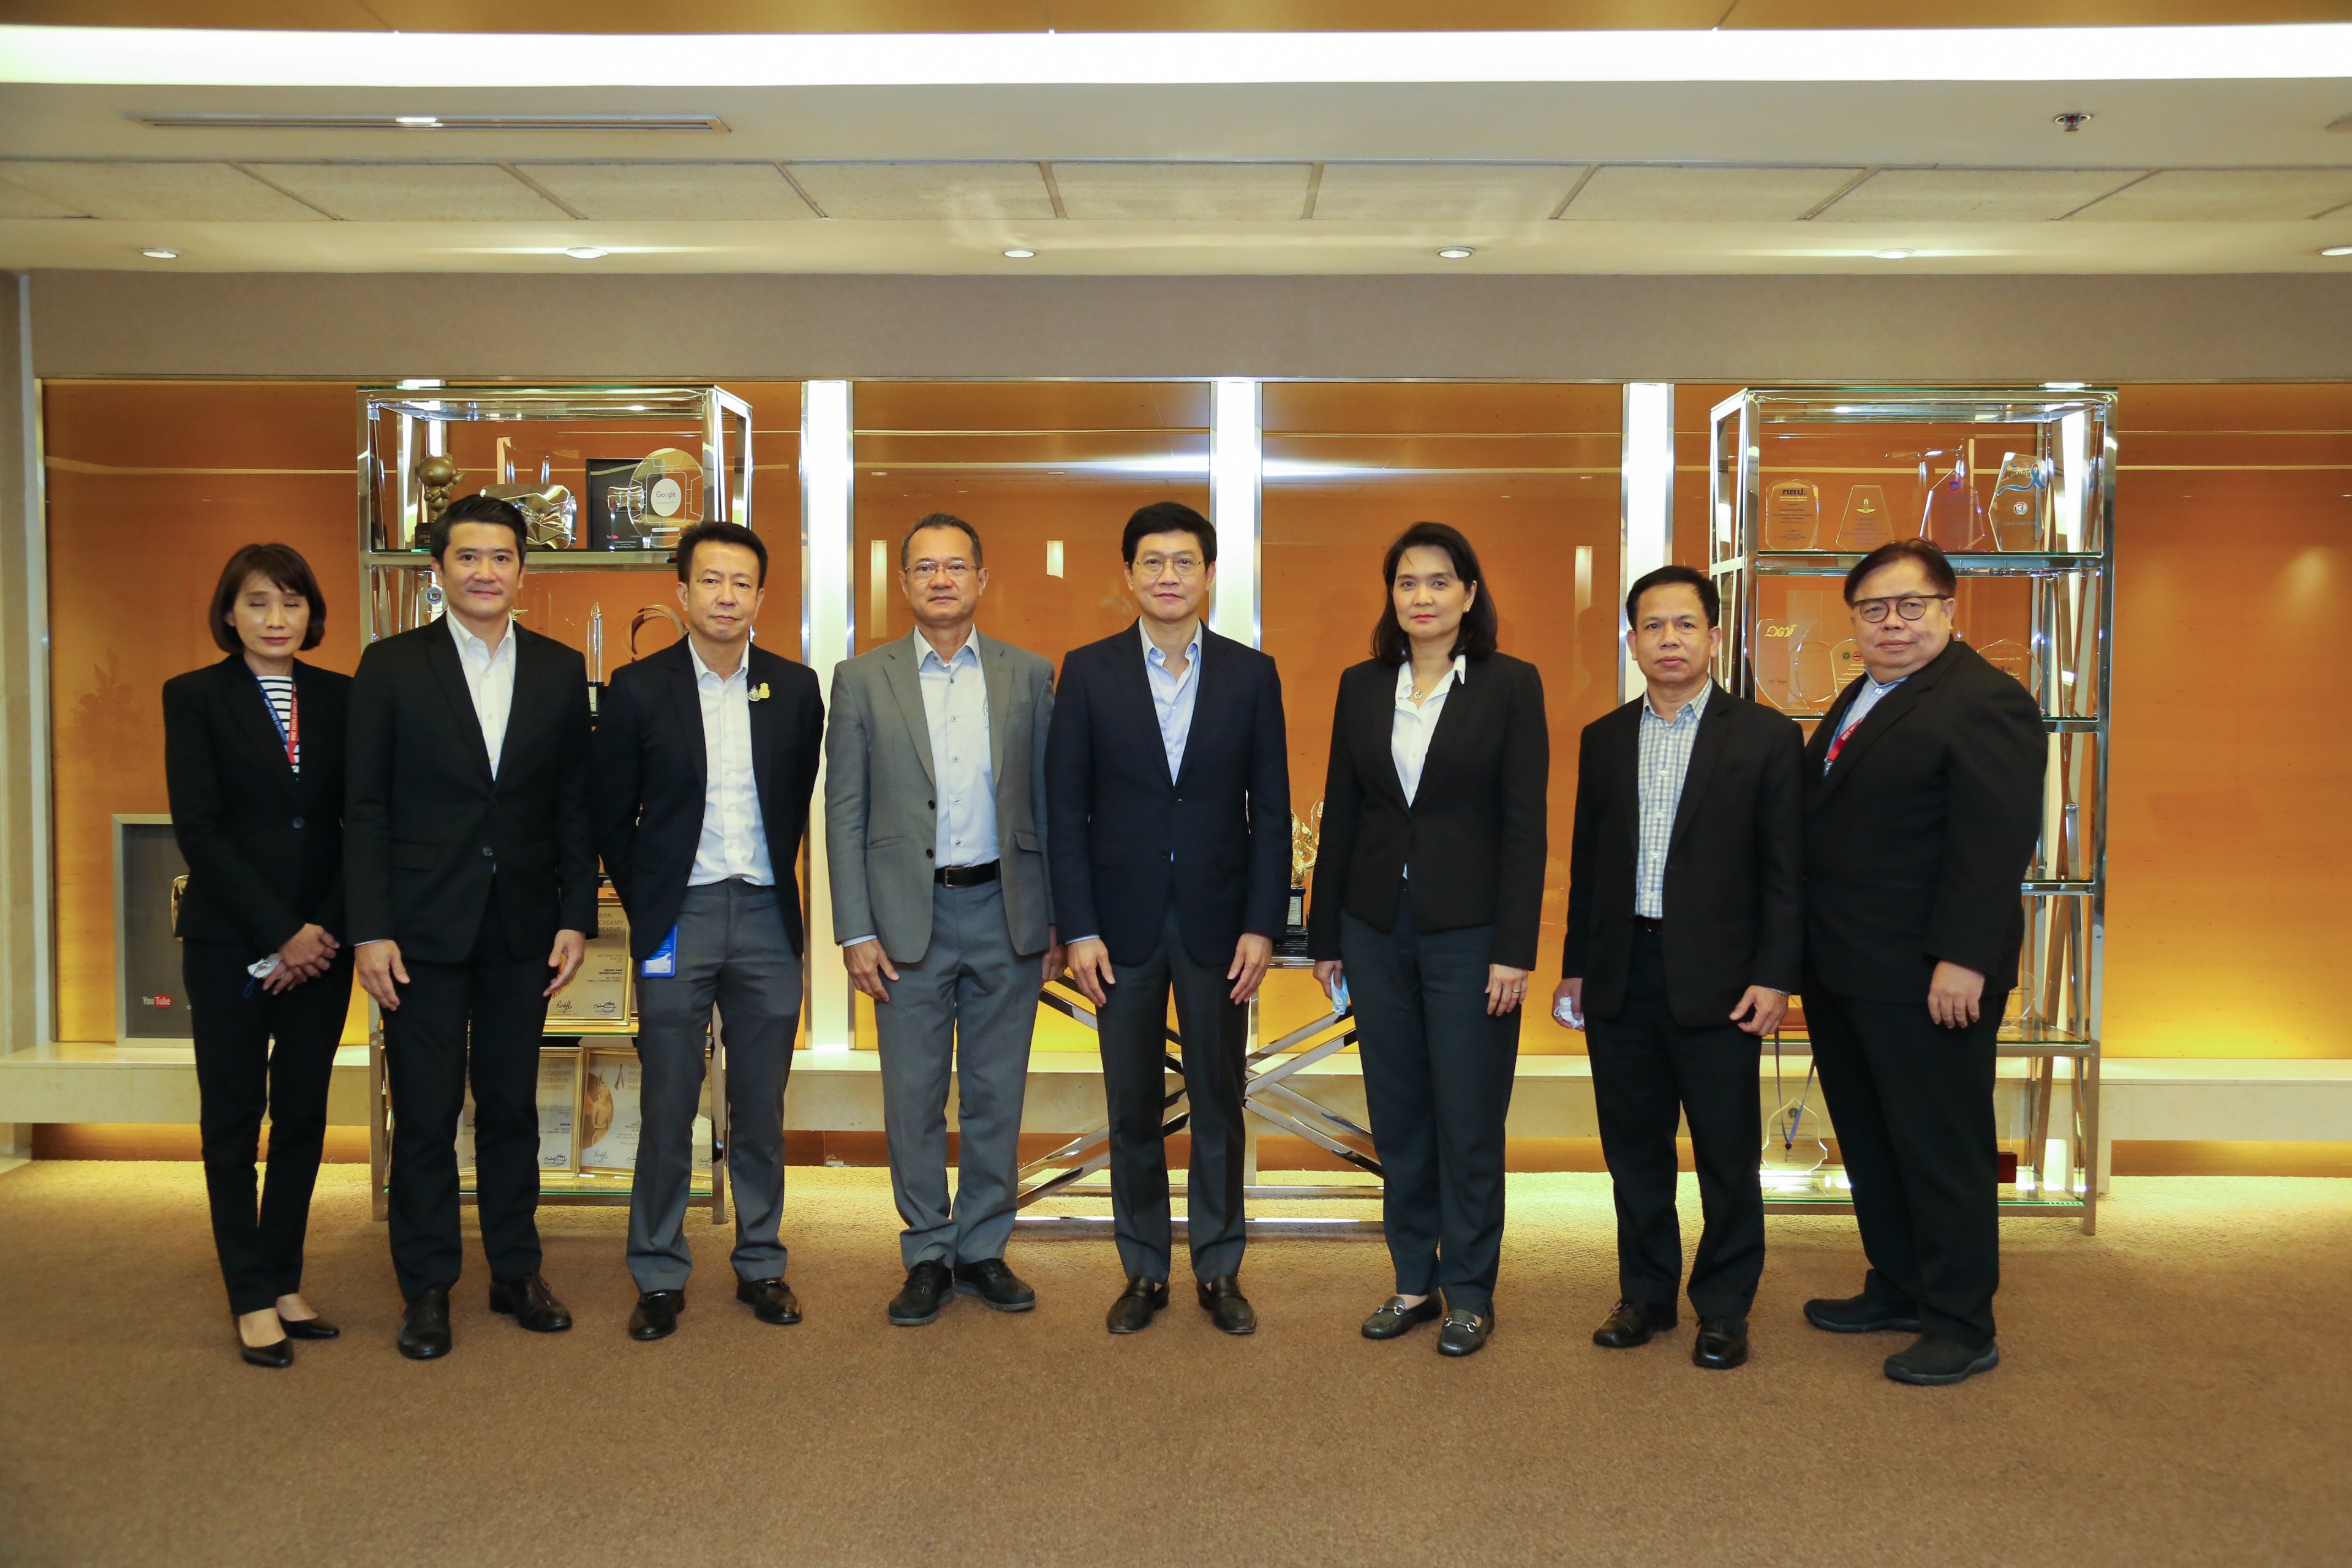 Director of NBTC visited Channel 3